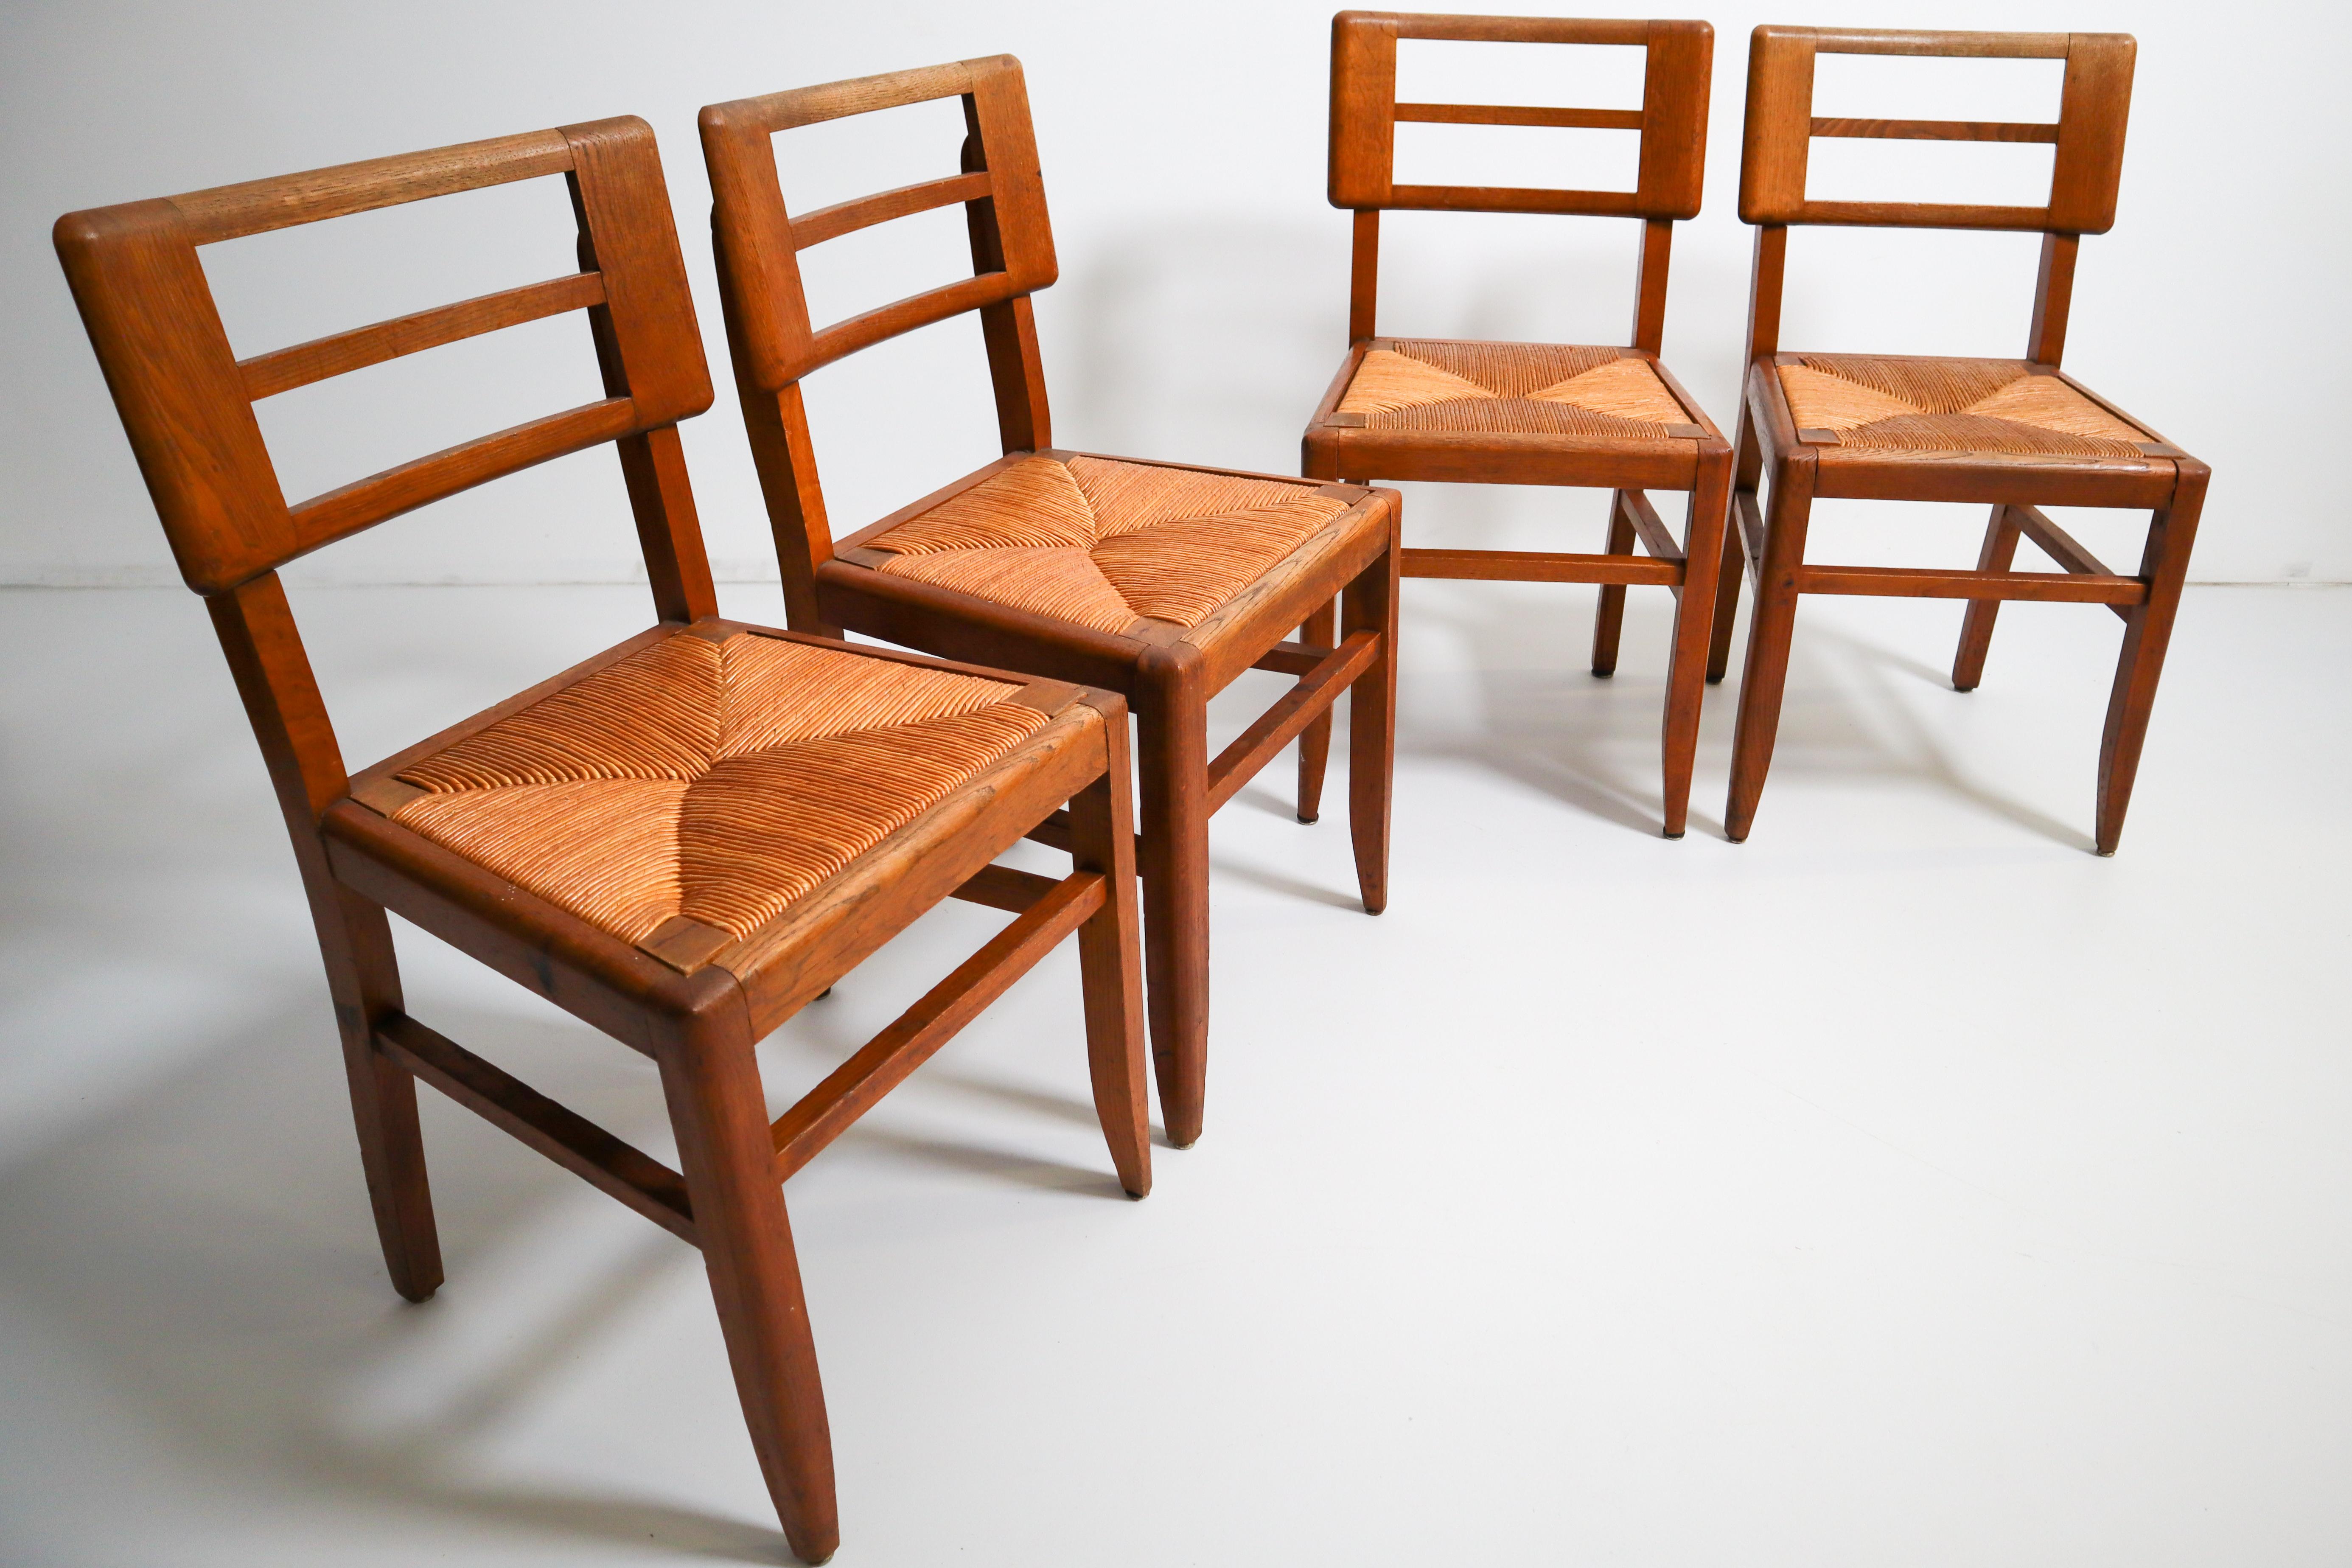 French Set of Four Dining Chairs by Pierre Cruege in Oak and Cane, France, 1940s For Sale